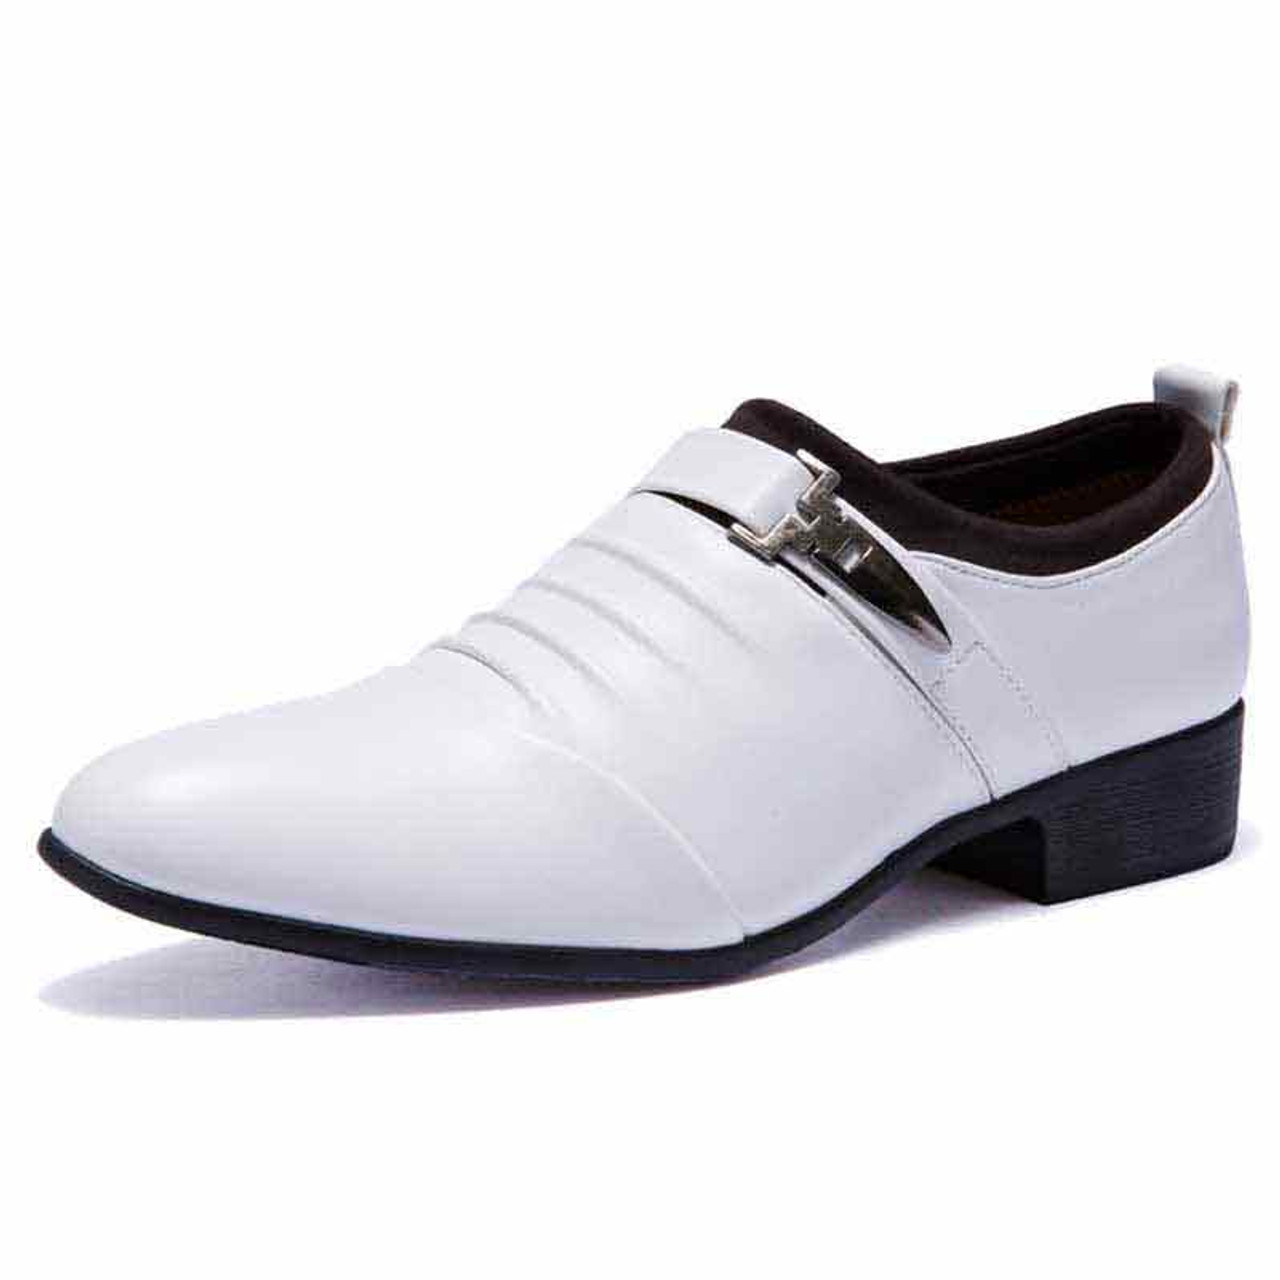 mens slip on dress shoes canada